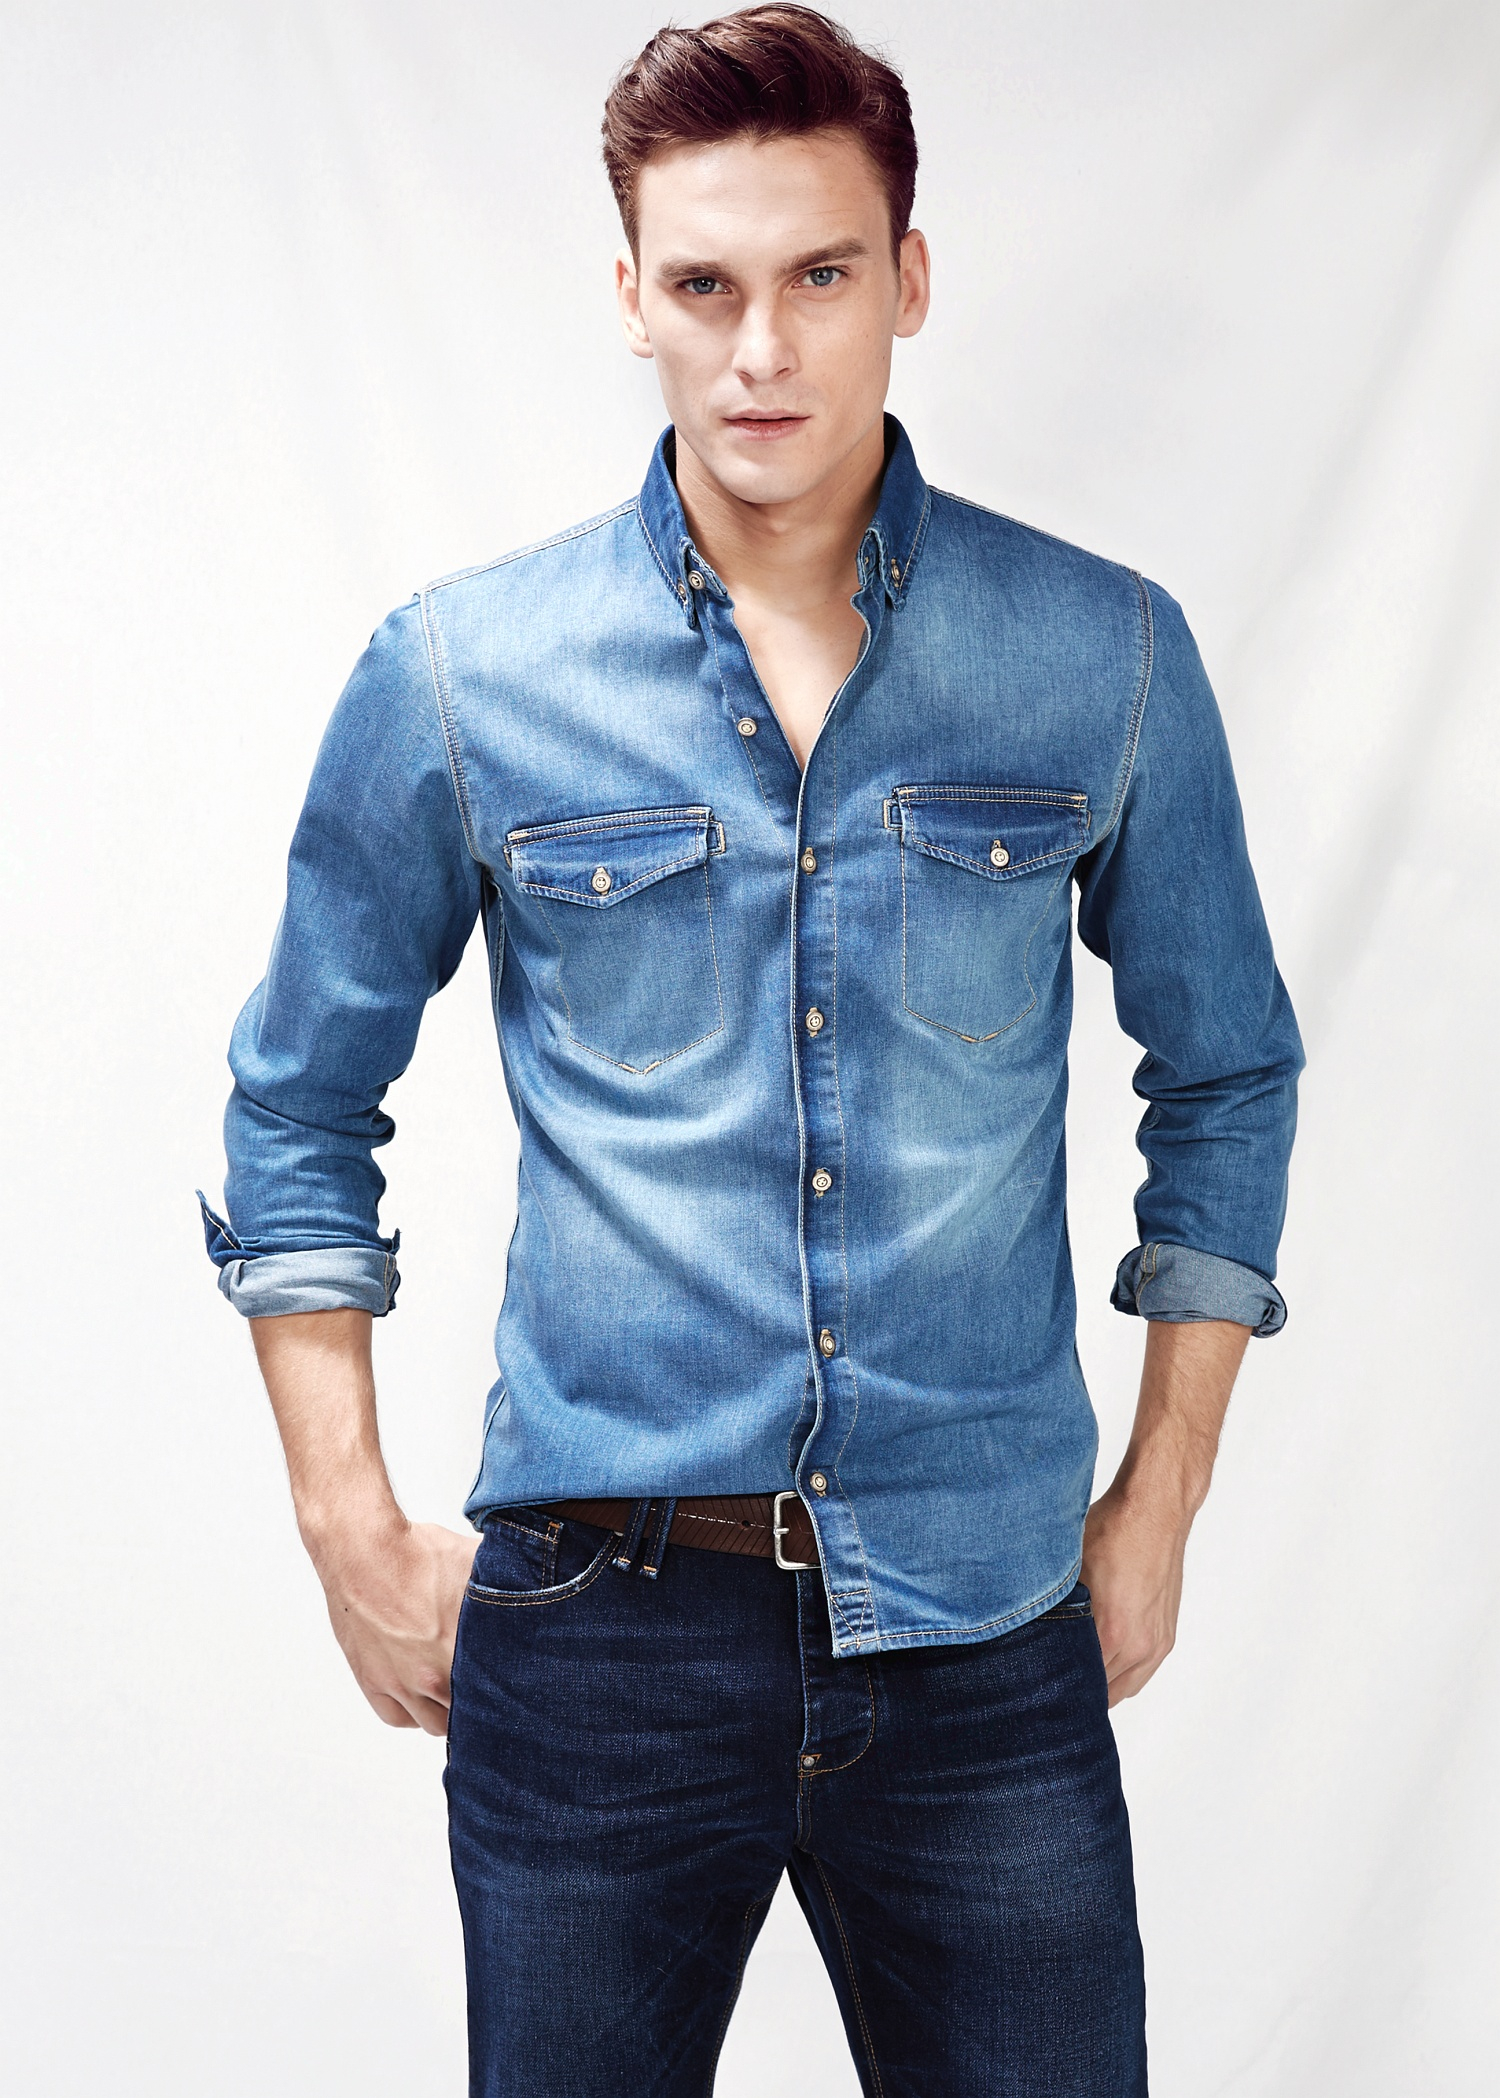 he-by-mango-blue-classic-fit-vintage-denim-shirt-product-1-21585710-0-934665010-normal